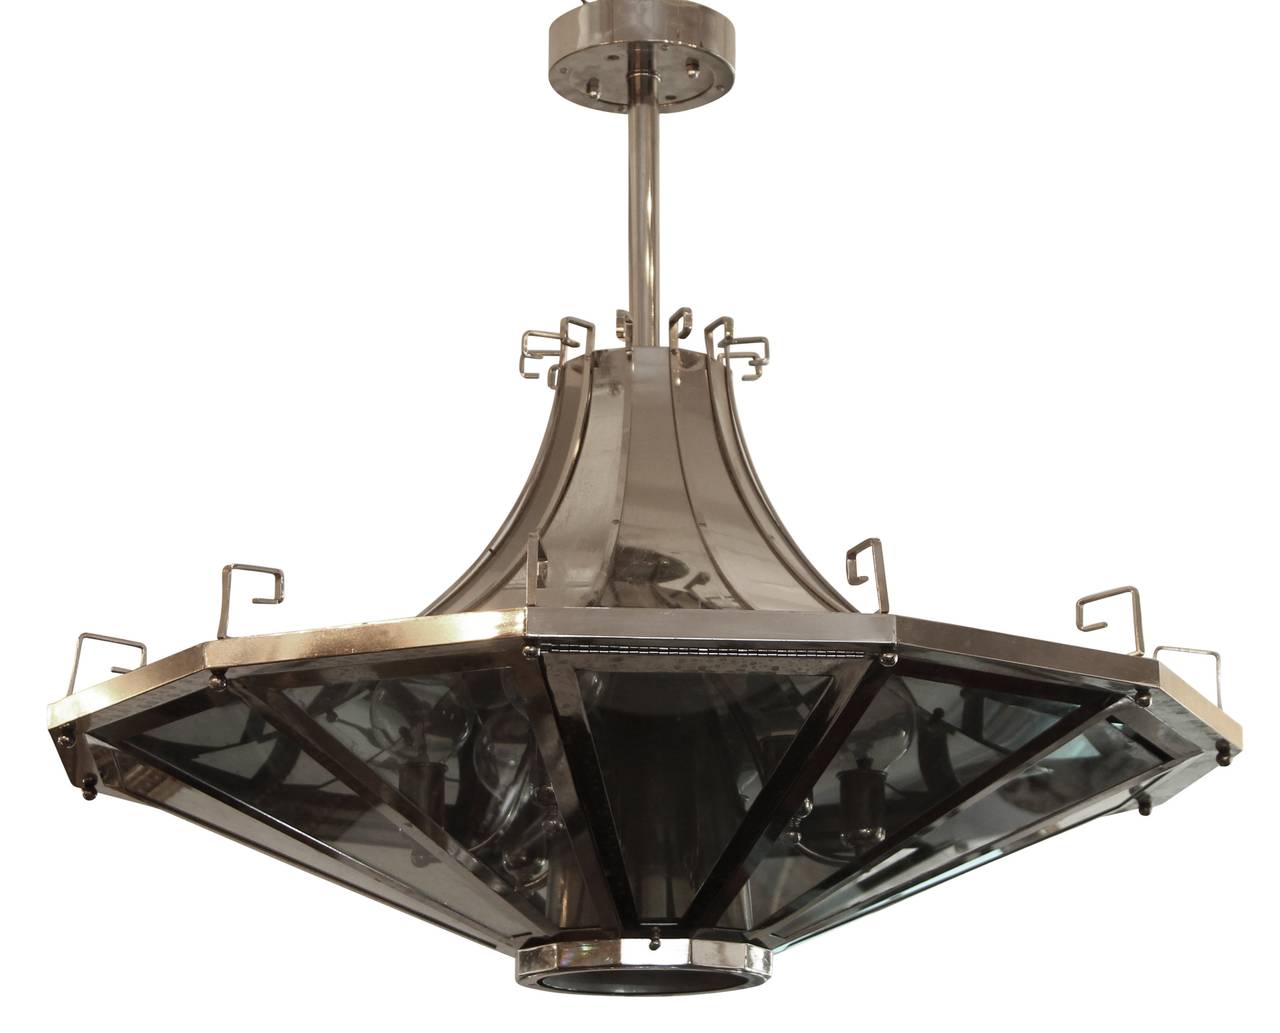 Modern spaceship shaped light fixture with Greek detailing on top. French made in the 1950s. Small quantity available at time of posting. Please inquire. Priced each. This can be seen at our 400 Gilligan St location in Scranton, PA.